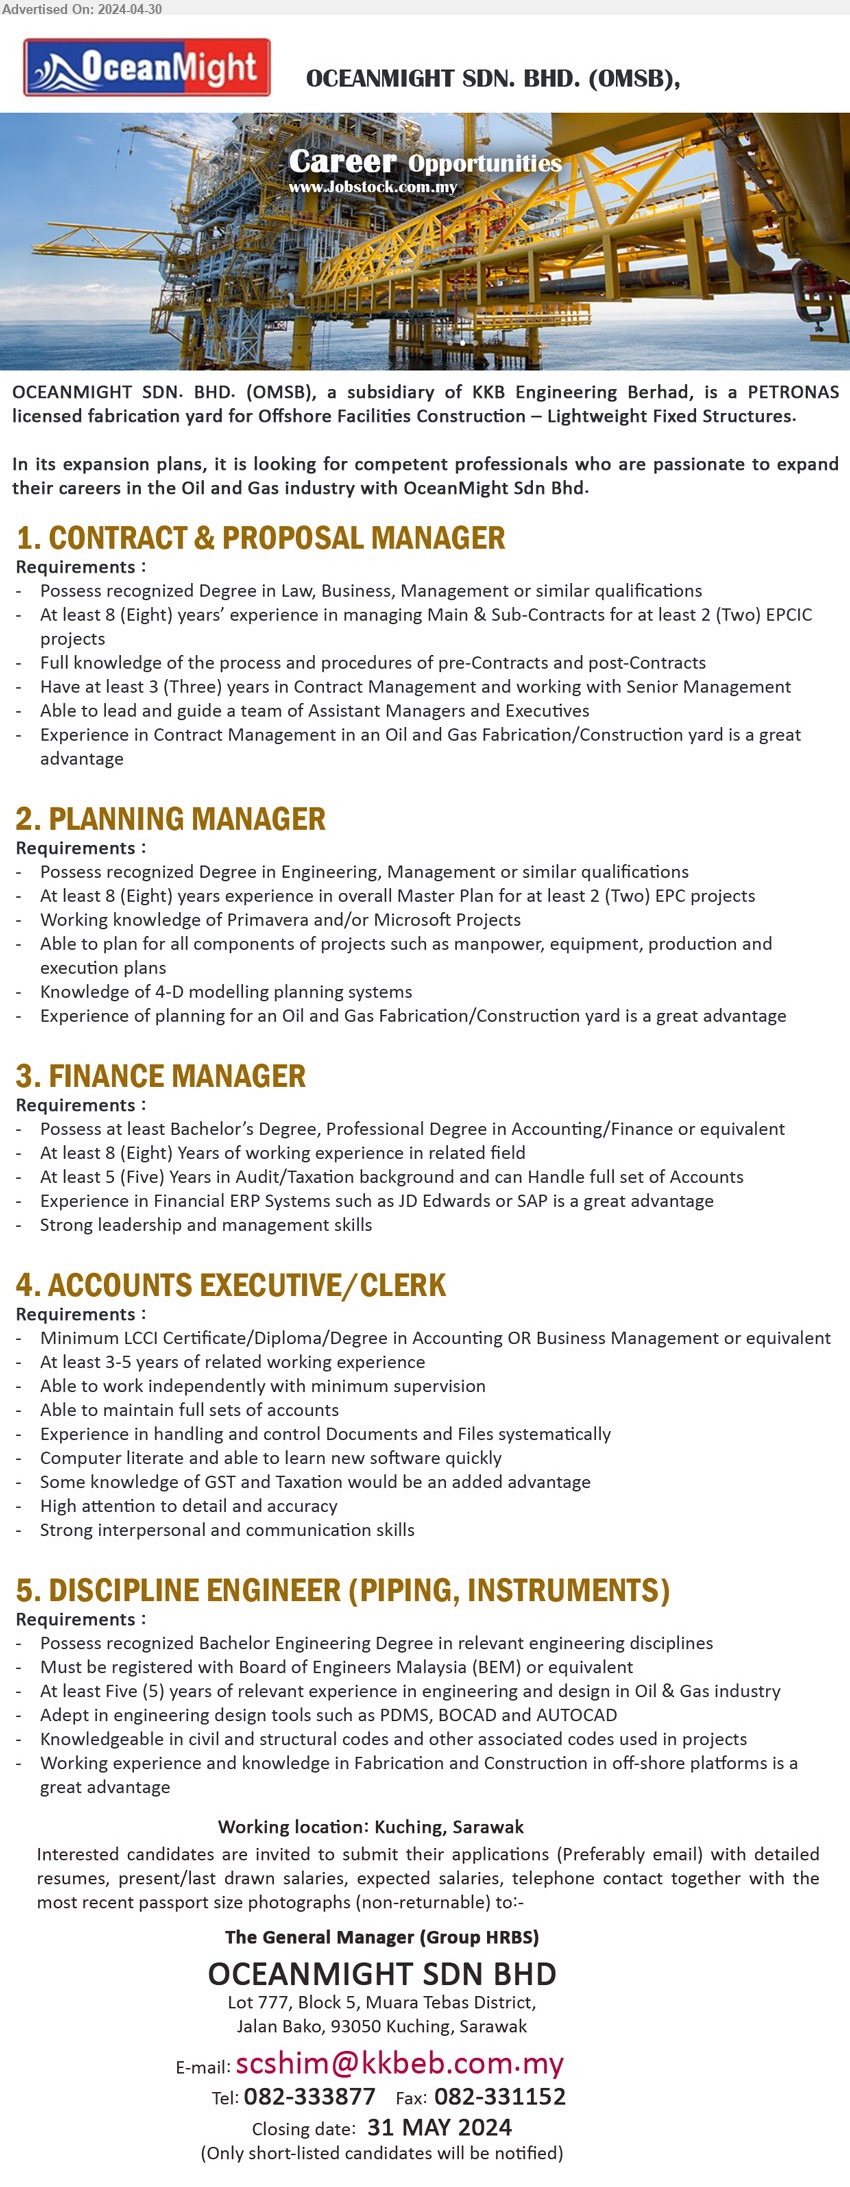 OCEANMIGHT SDN BHD - 1. CONTRACT & PROPOSAL MANAGER (Kuching),  Degree in Law, Business, Management, 8 yrs. exp.,...
2. PLANNING MANAGER (Kuching),  Degree in Engineering, Management, 8 yrs. exp.,...
3. FINANCE MANAGER  (Kuching), Bachelor’s Degree, Professional Degree in Accounting/Finance,...
4. ACCOUNTS EXECUTIVE/CLERK  (Kuching), LCCI Certificate/Diploma/Degree in Accounting OR Business Management,...
5. DISCIPLINE ENGINEER (PIPING, INSTRUMENTS) (Kuching), Bachelor Engineering Degree, must be registered with Board of Engineers Malaysia (BEM) ,...
Call 082-333877 / Email resume to ...